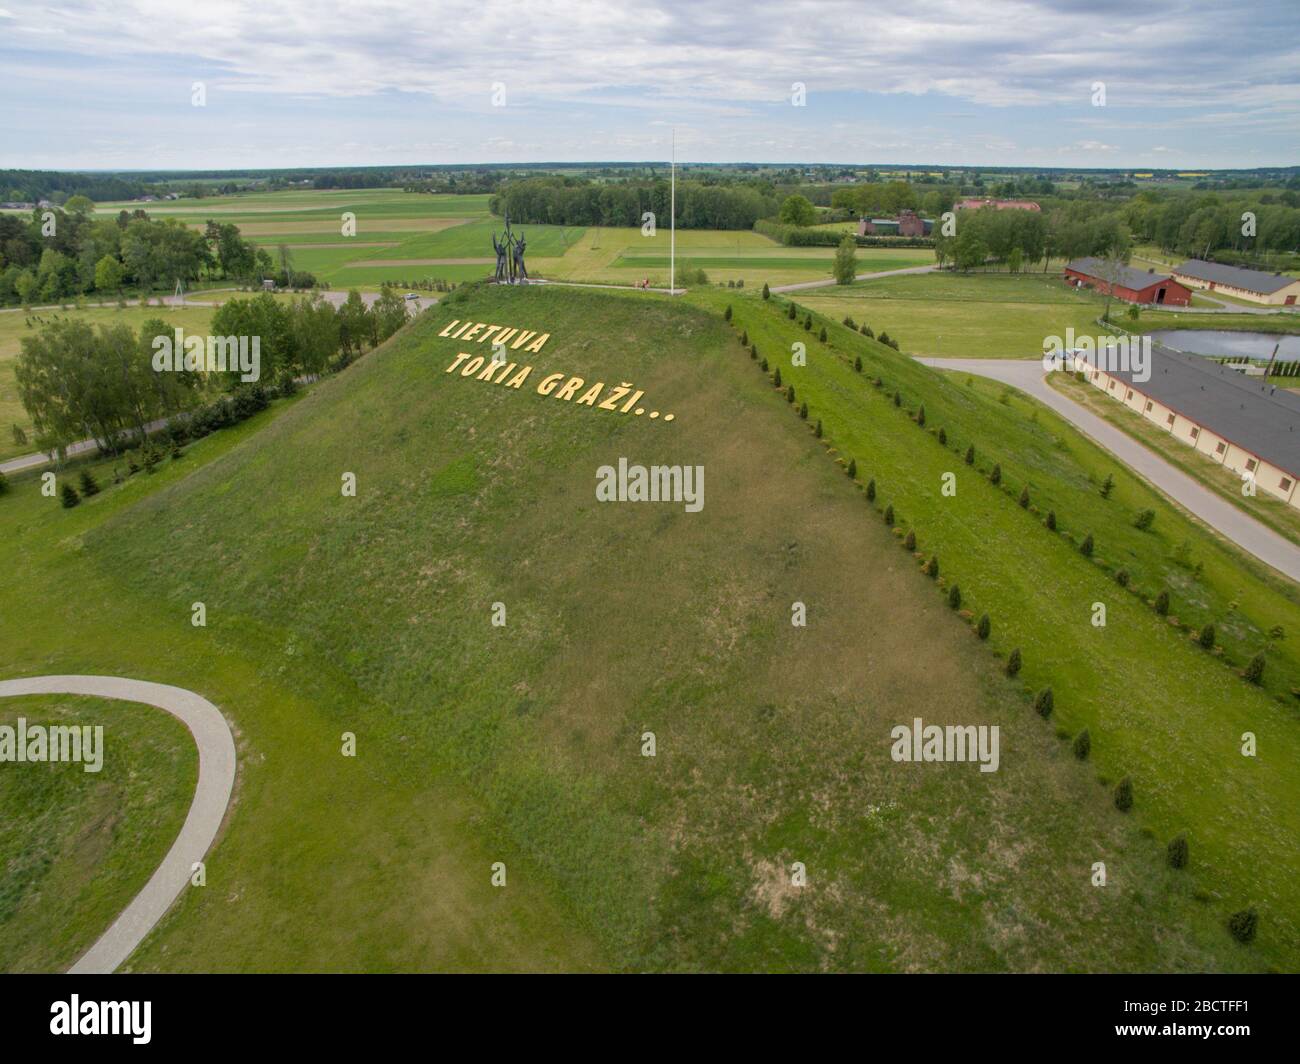 Aerial View Of Harmony Park In Lithuania And Letters Lithuania Is Very